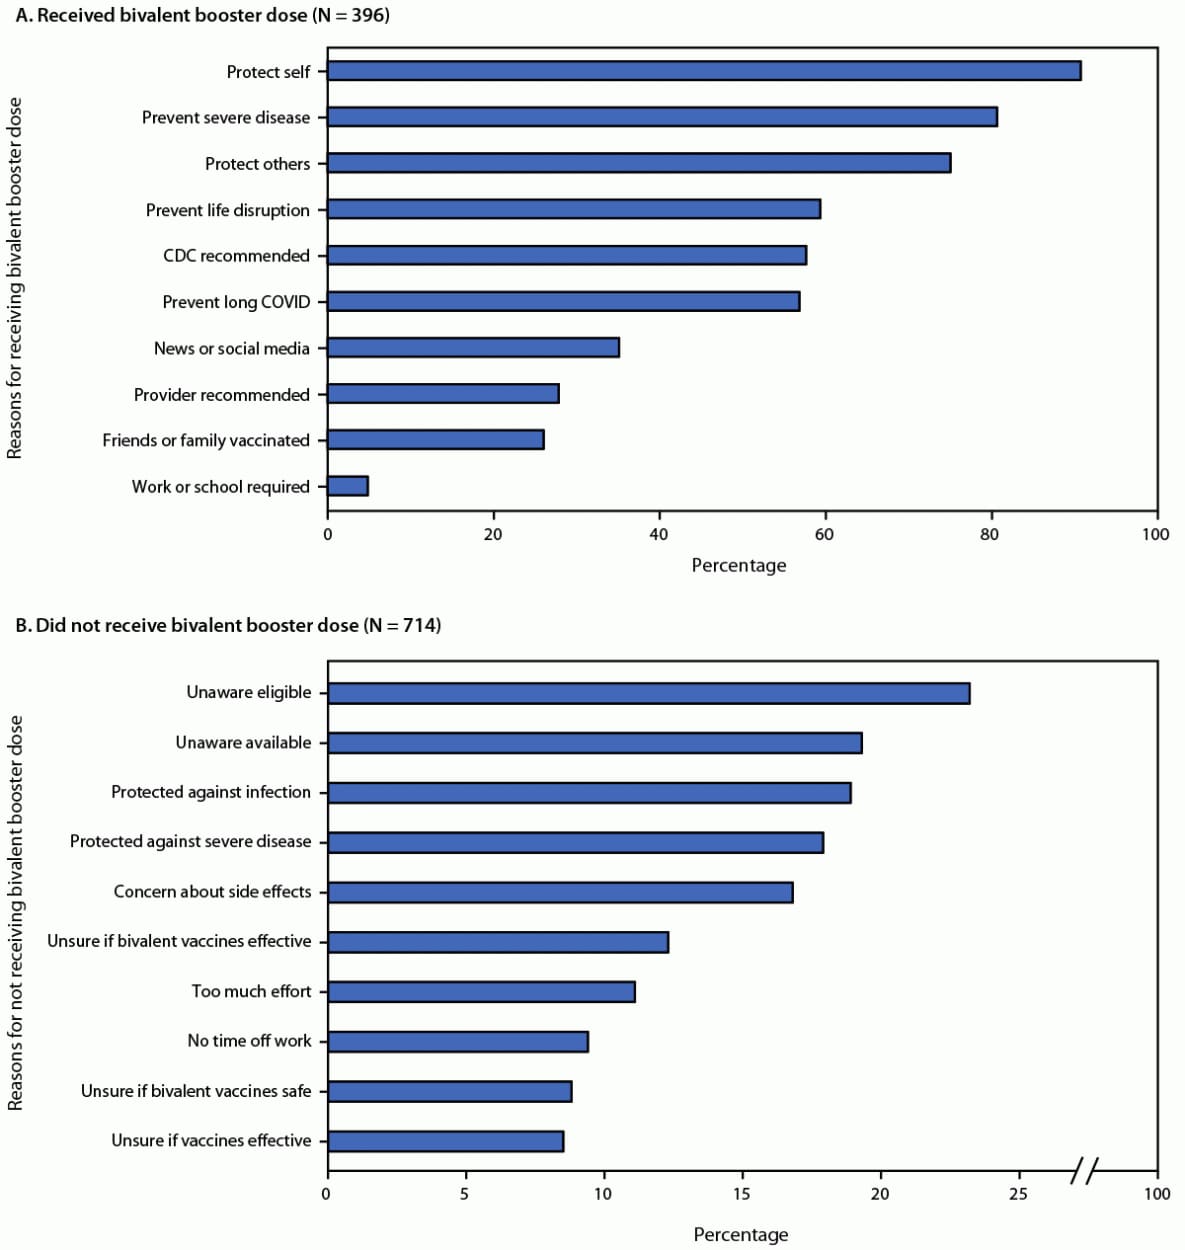 The figure is a two-panel bar graph showing the reasons for receiving or not receiving a bivalent COVID-19 booster dose during November through December 2022 in the United States, among persons who did and did not receive it.